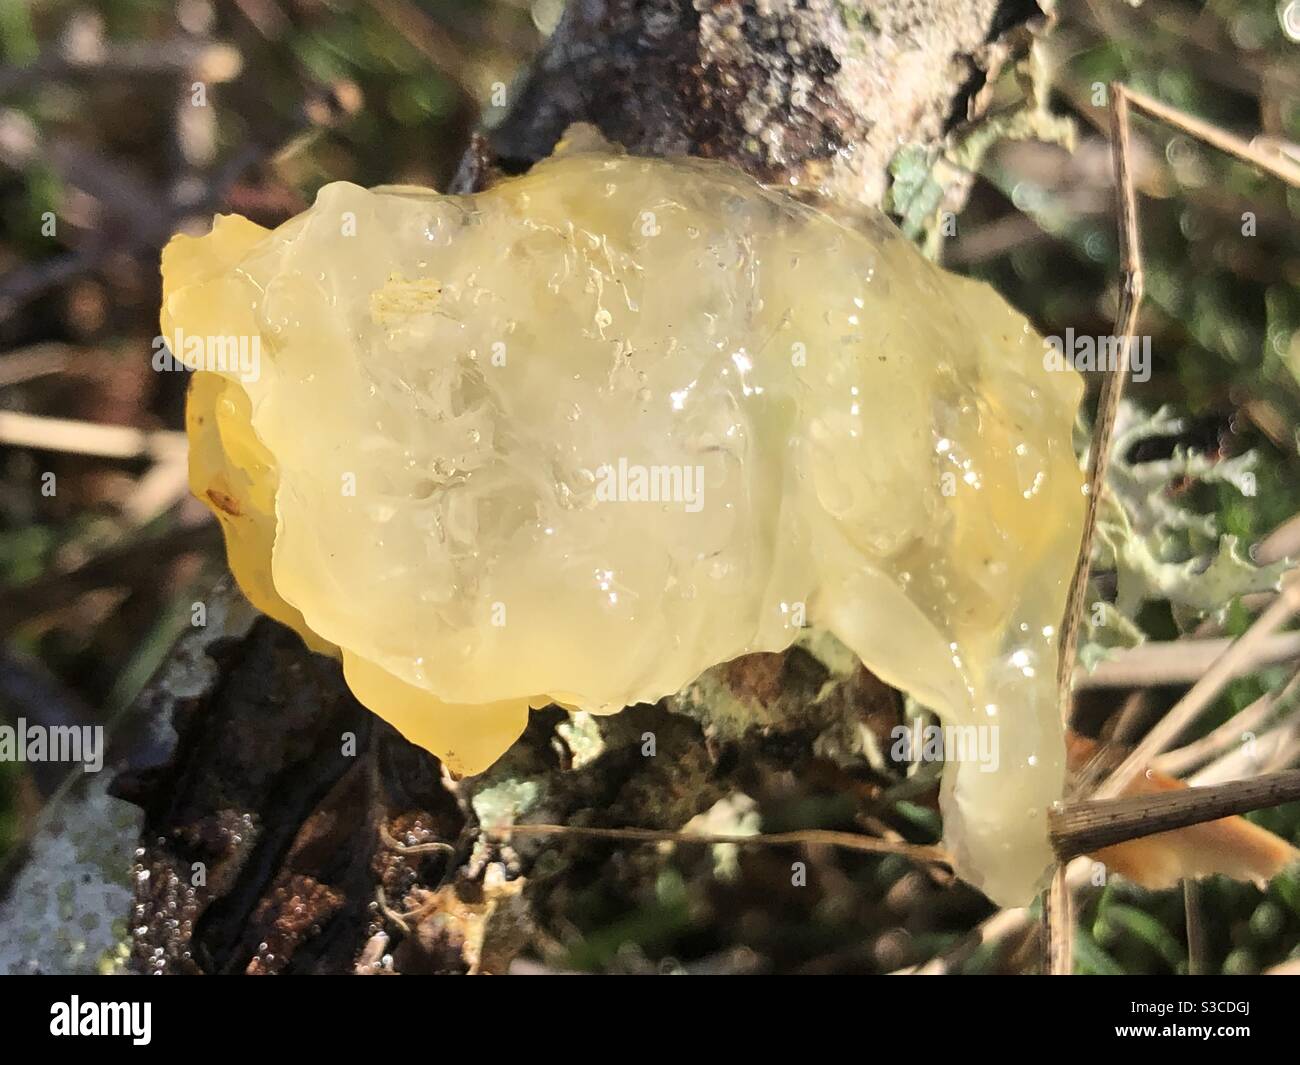 Slimy jelly mushroom in the glow of the morning light. Stock Photo